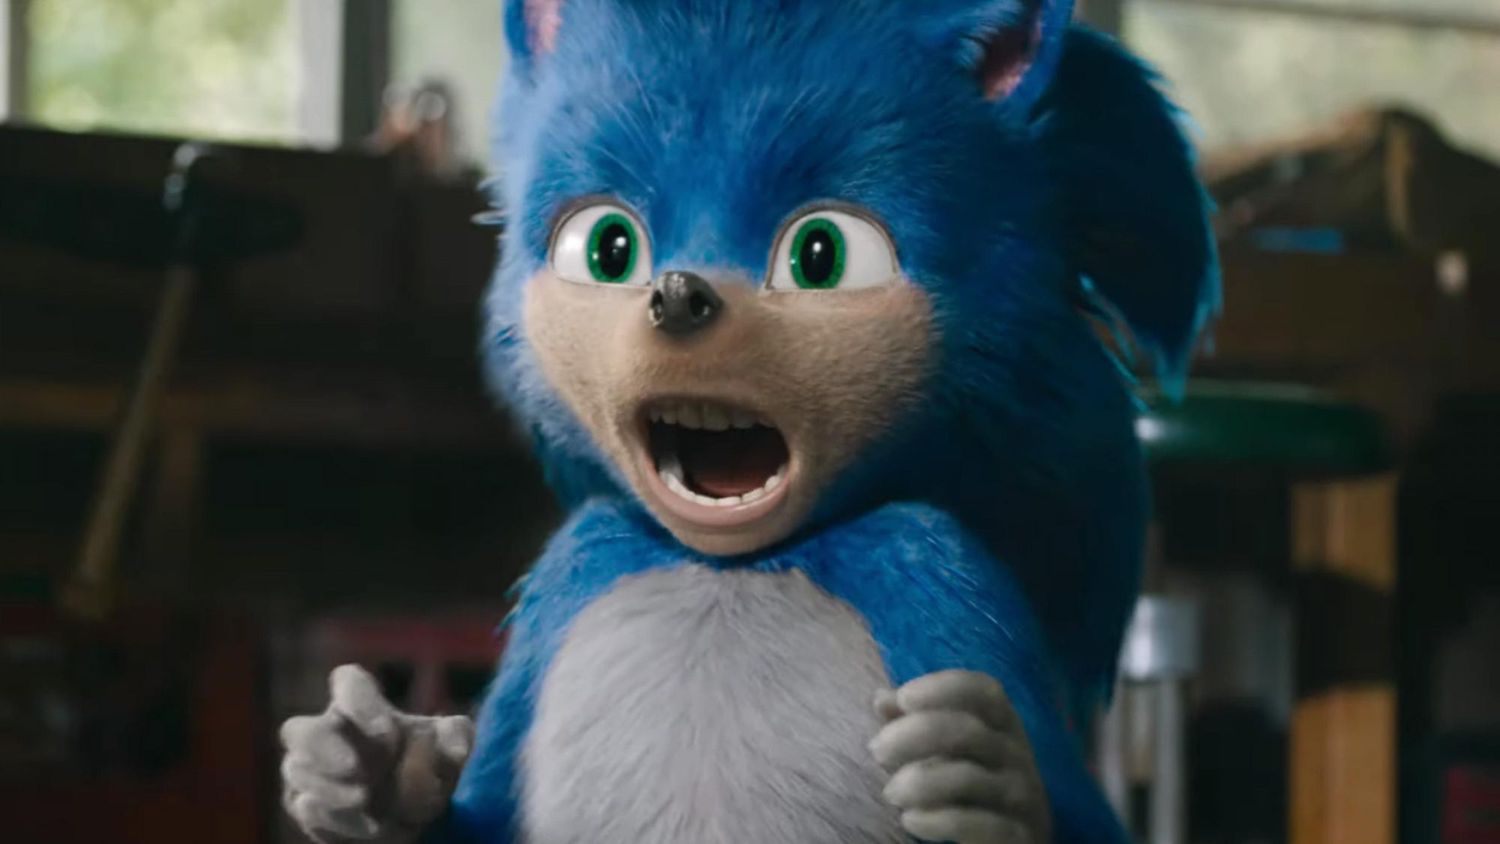 Sonic The Hedgehog (2019) - Official Trailer - Paramount Pictures (screen grab) https://www.youtube.com/watch?v=FvvZaBf9QQI CR: Paramount Pictures